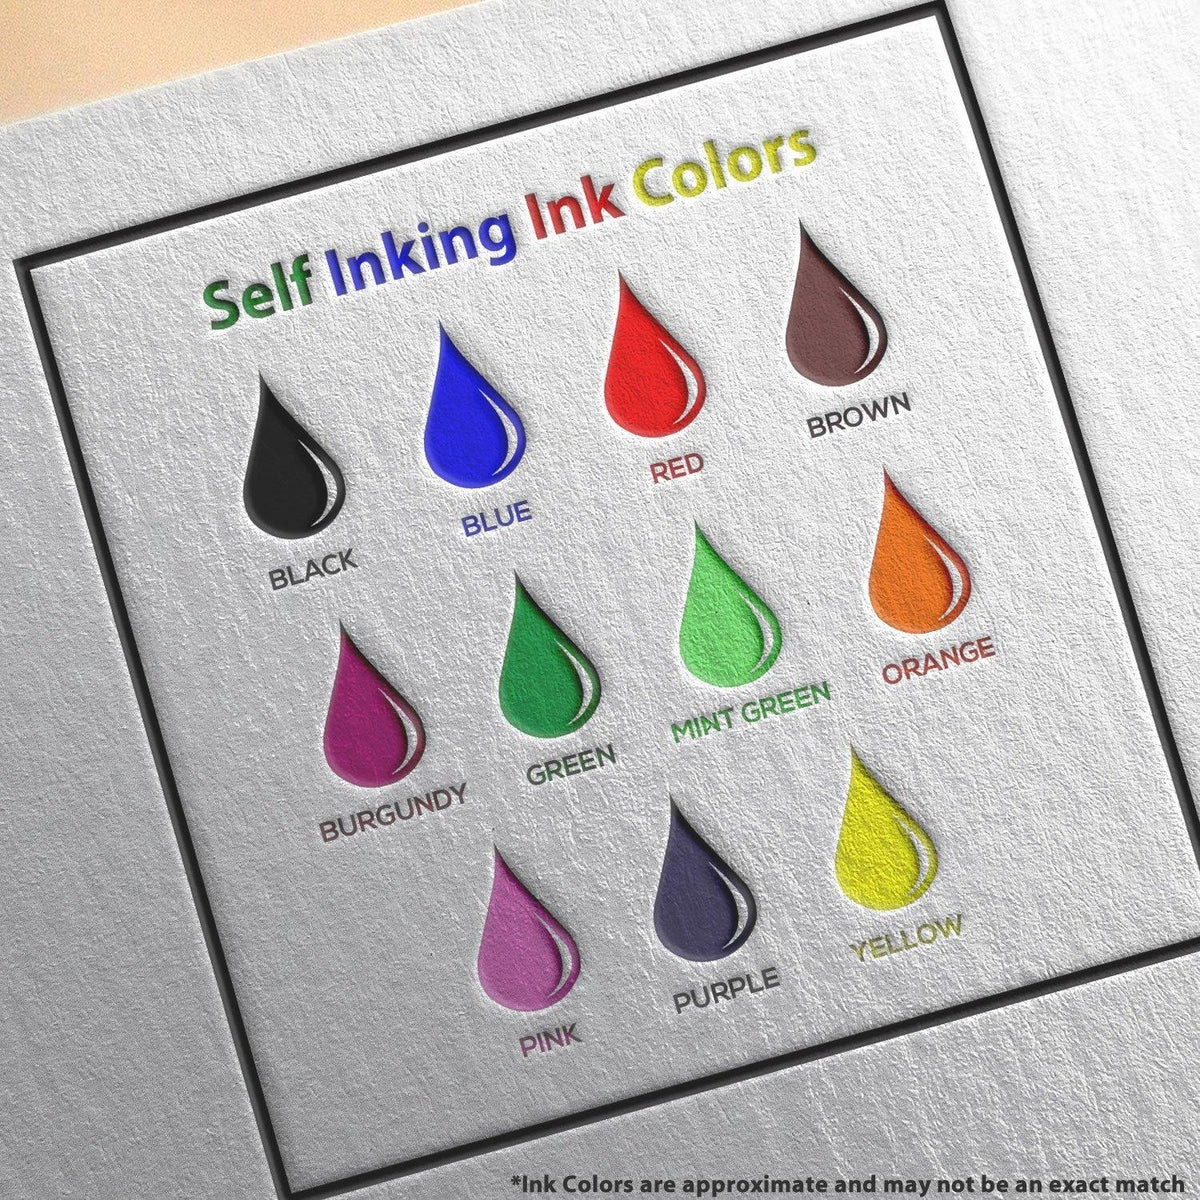 Self-Inking For Official Use Only Stamp - Engineer Seal Stamps - Brand_Trodat, Impression Size_Small, Stamp Type_Self-Inking Stamp, Type of Use_Business, Type of Use_Legal, Type of Use_Office, Type of Use_Professional